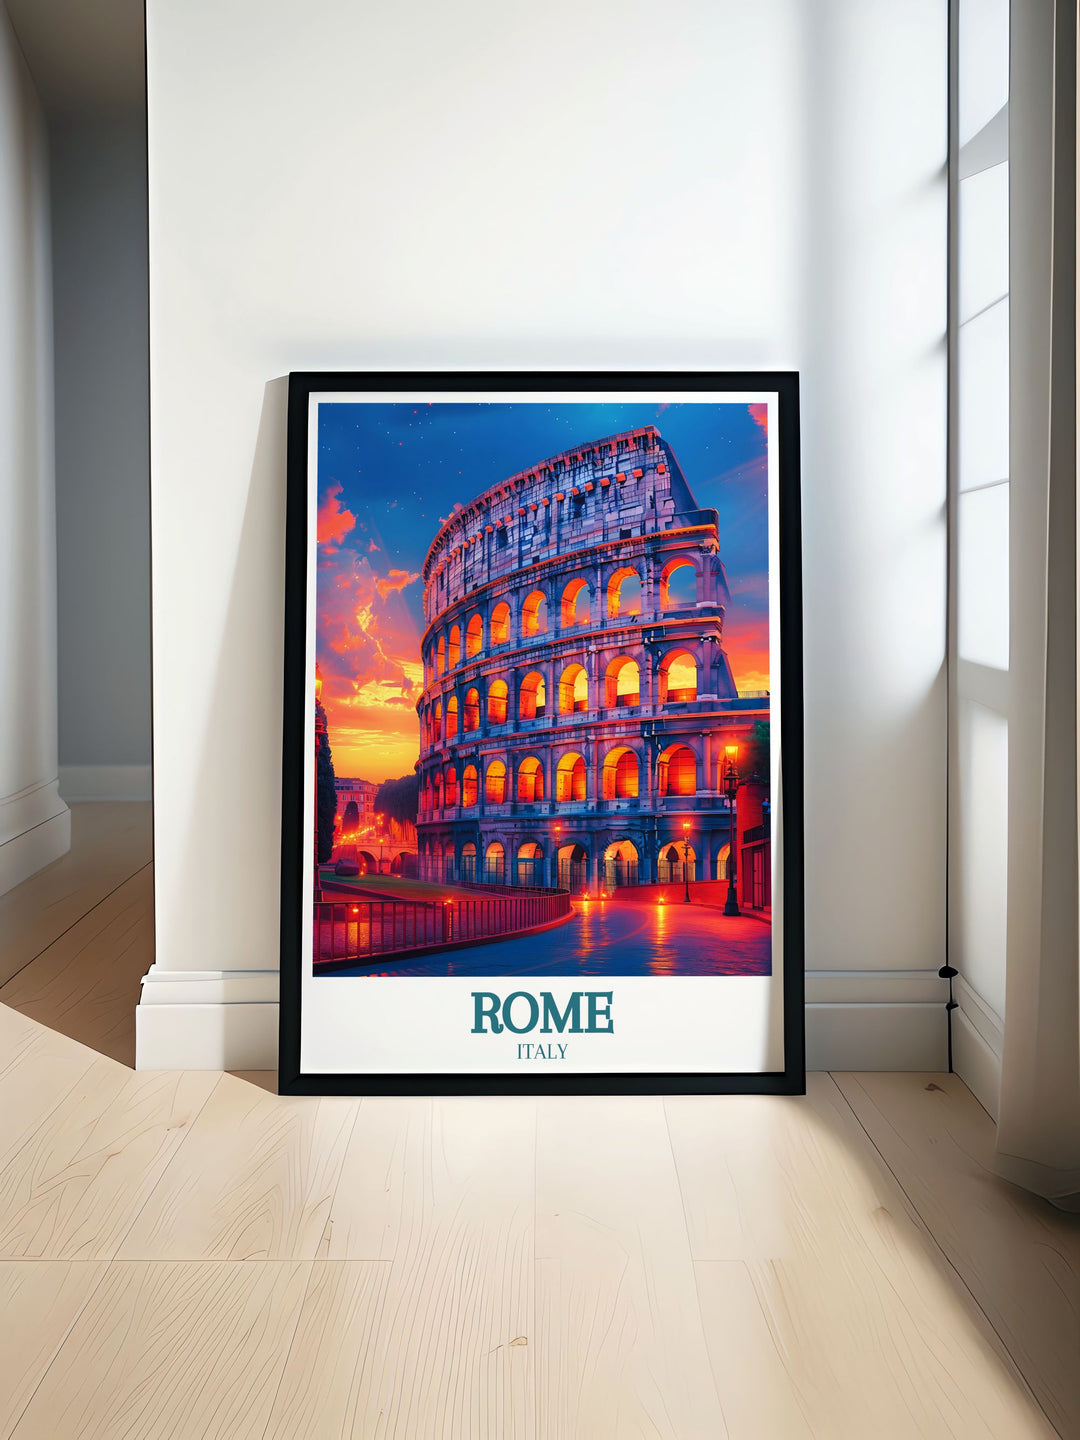 Stunning black and white Rome print featuring the Colosseum and Vatican City ideal for home decor and gifts including anniversaries birthdays and Christmas adding a touch of elegance to any space with fine line details and timeless appeal.